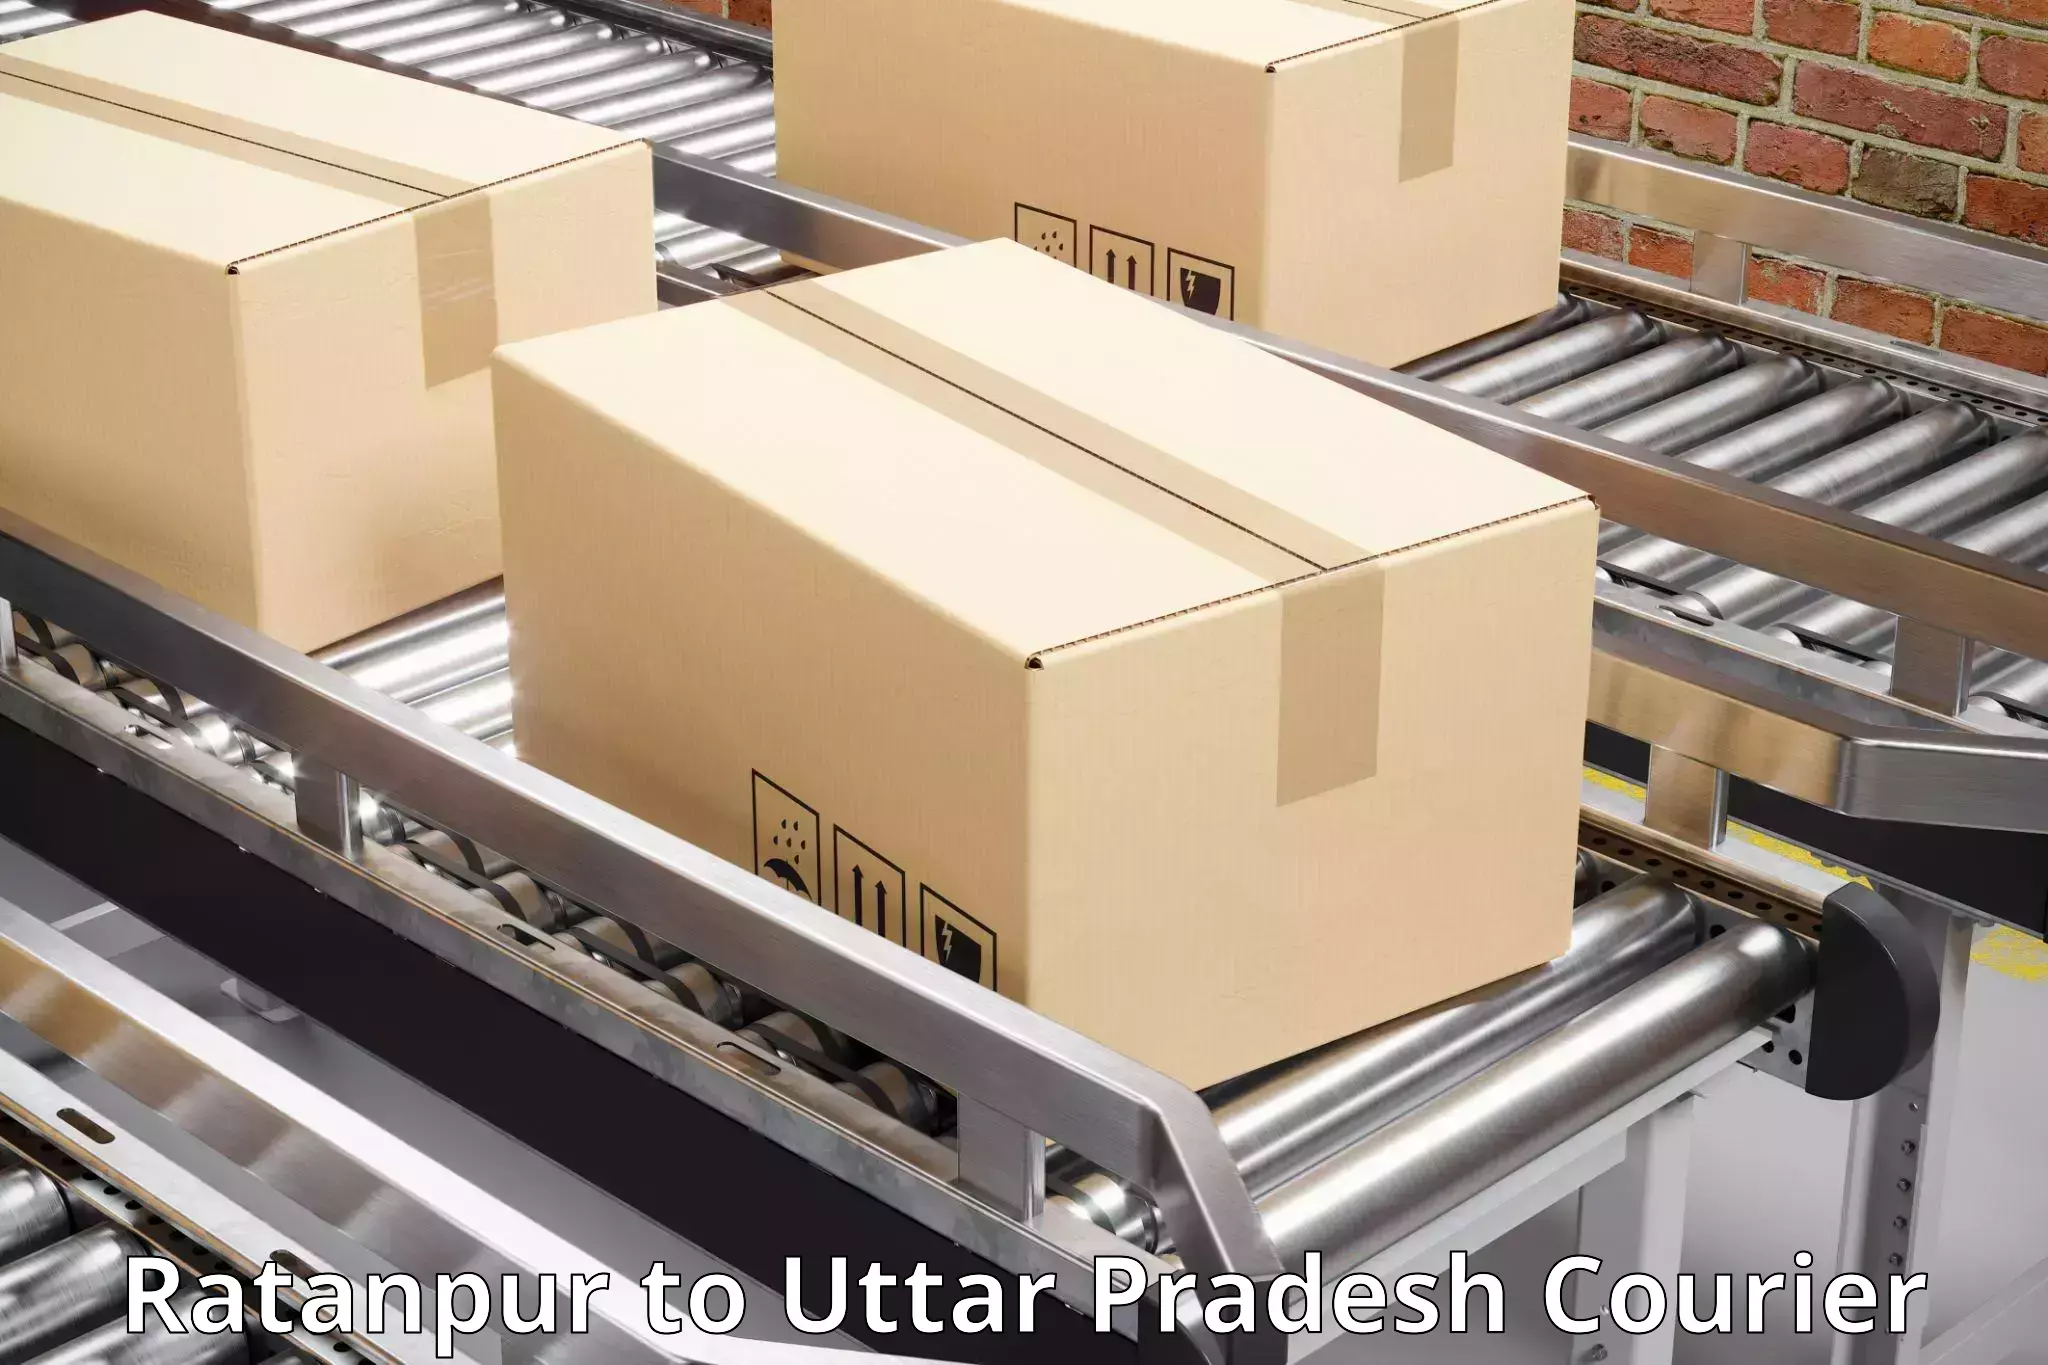 Tailored delivery services Ratanpur to Mathura